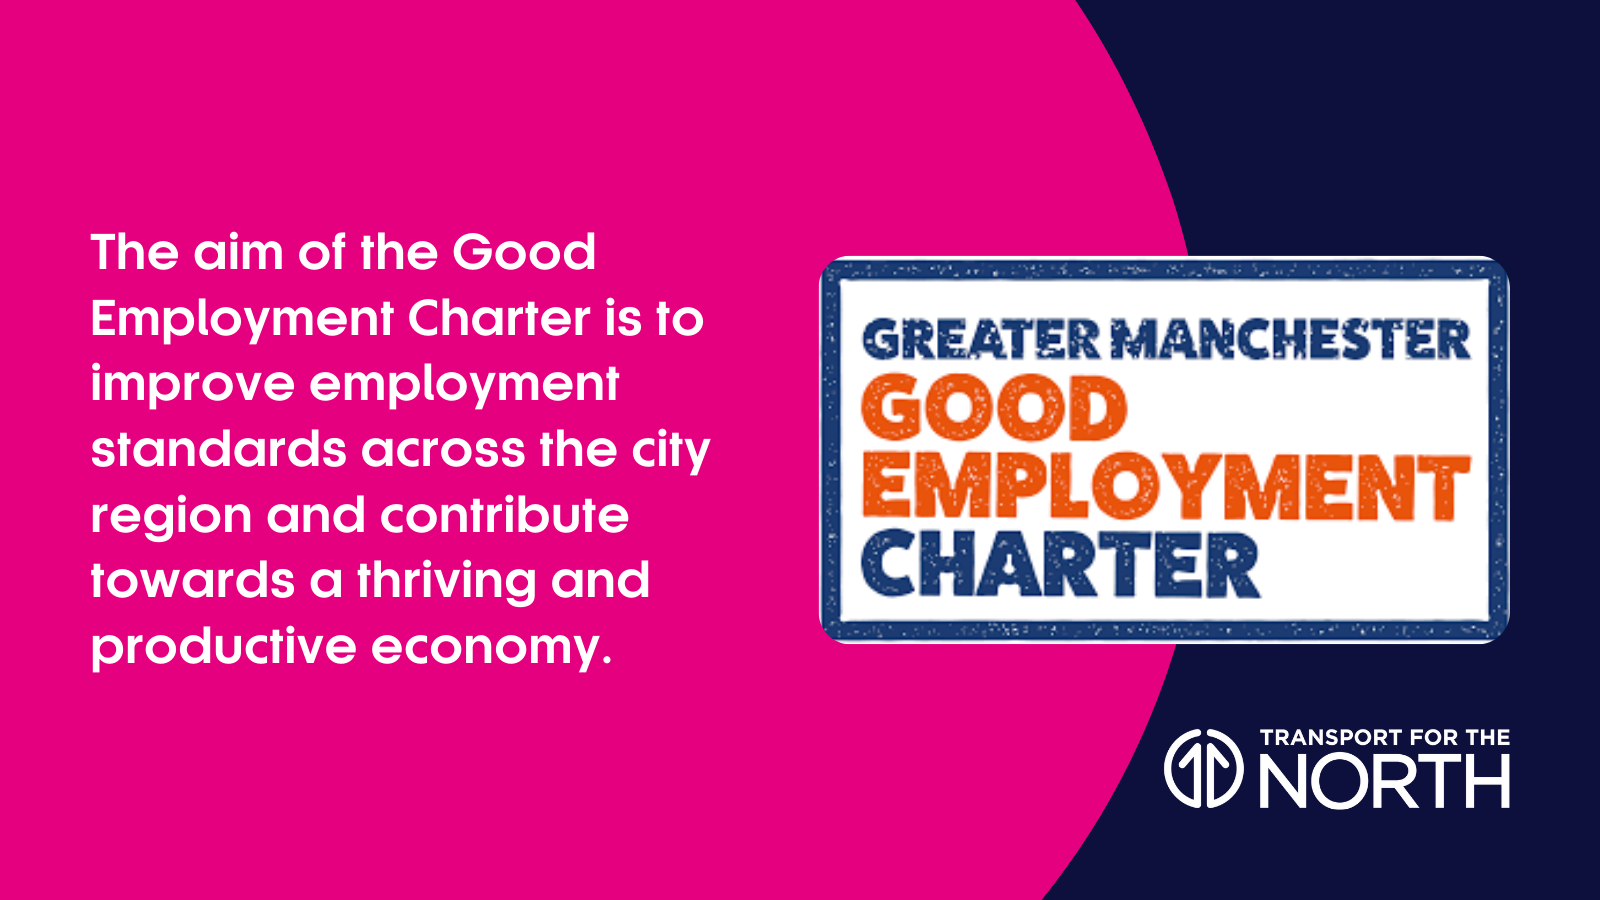 Transport for the North Greater Manchester Good Employment Charter